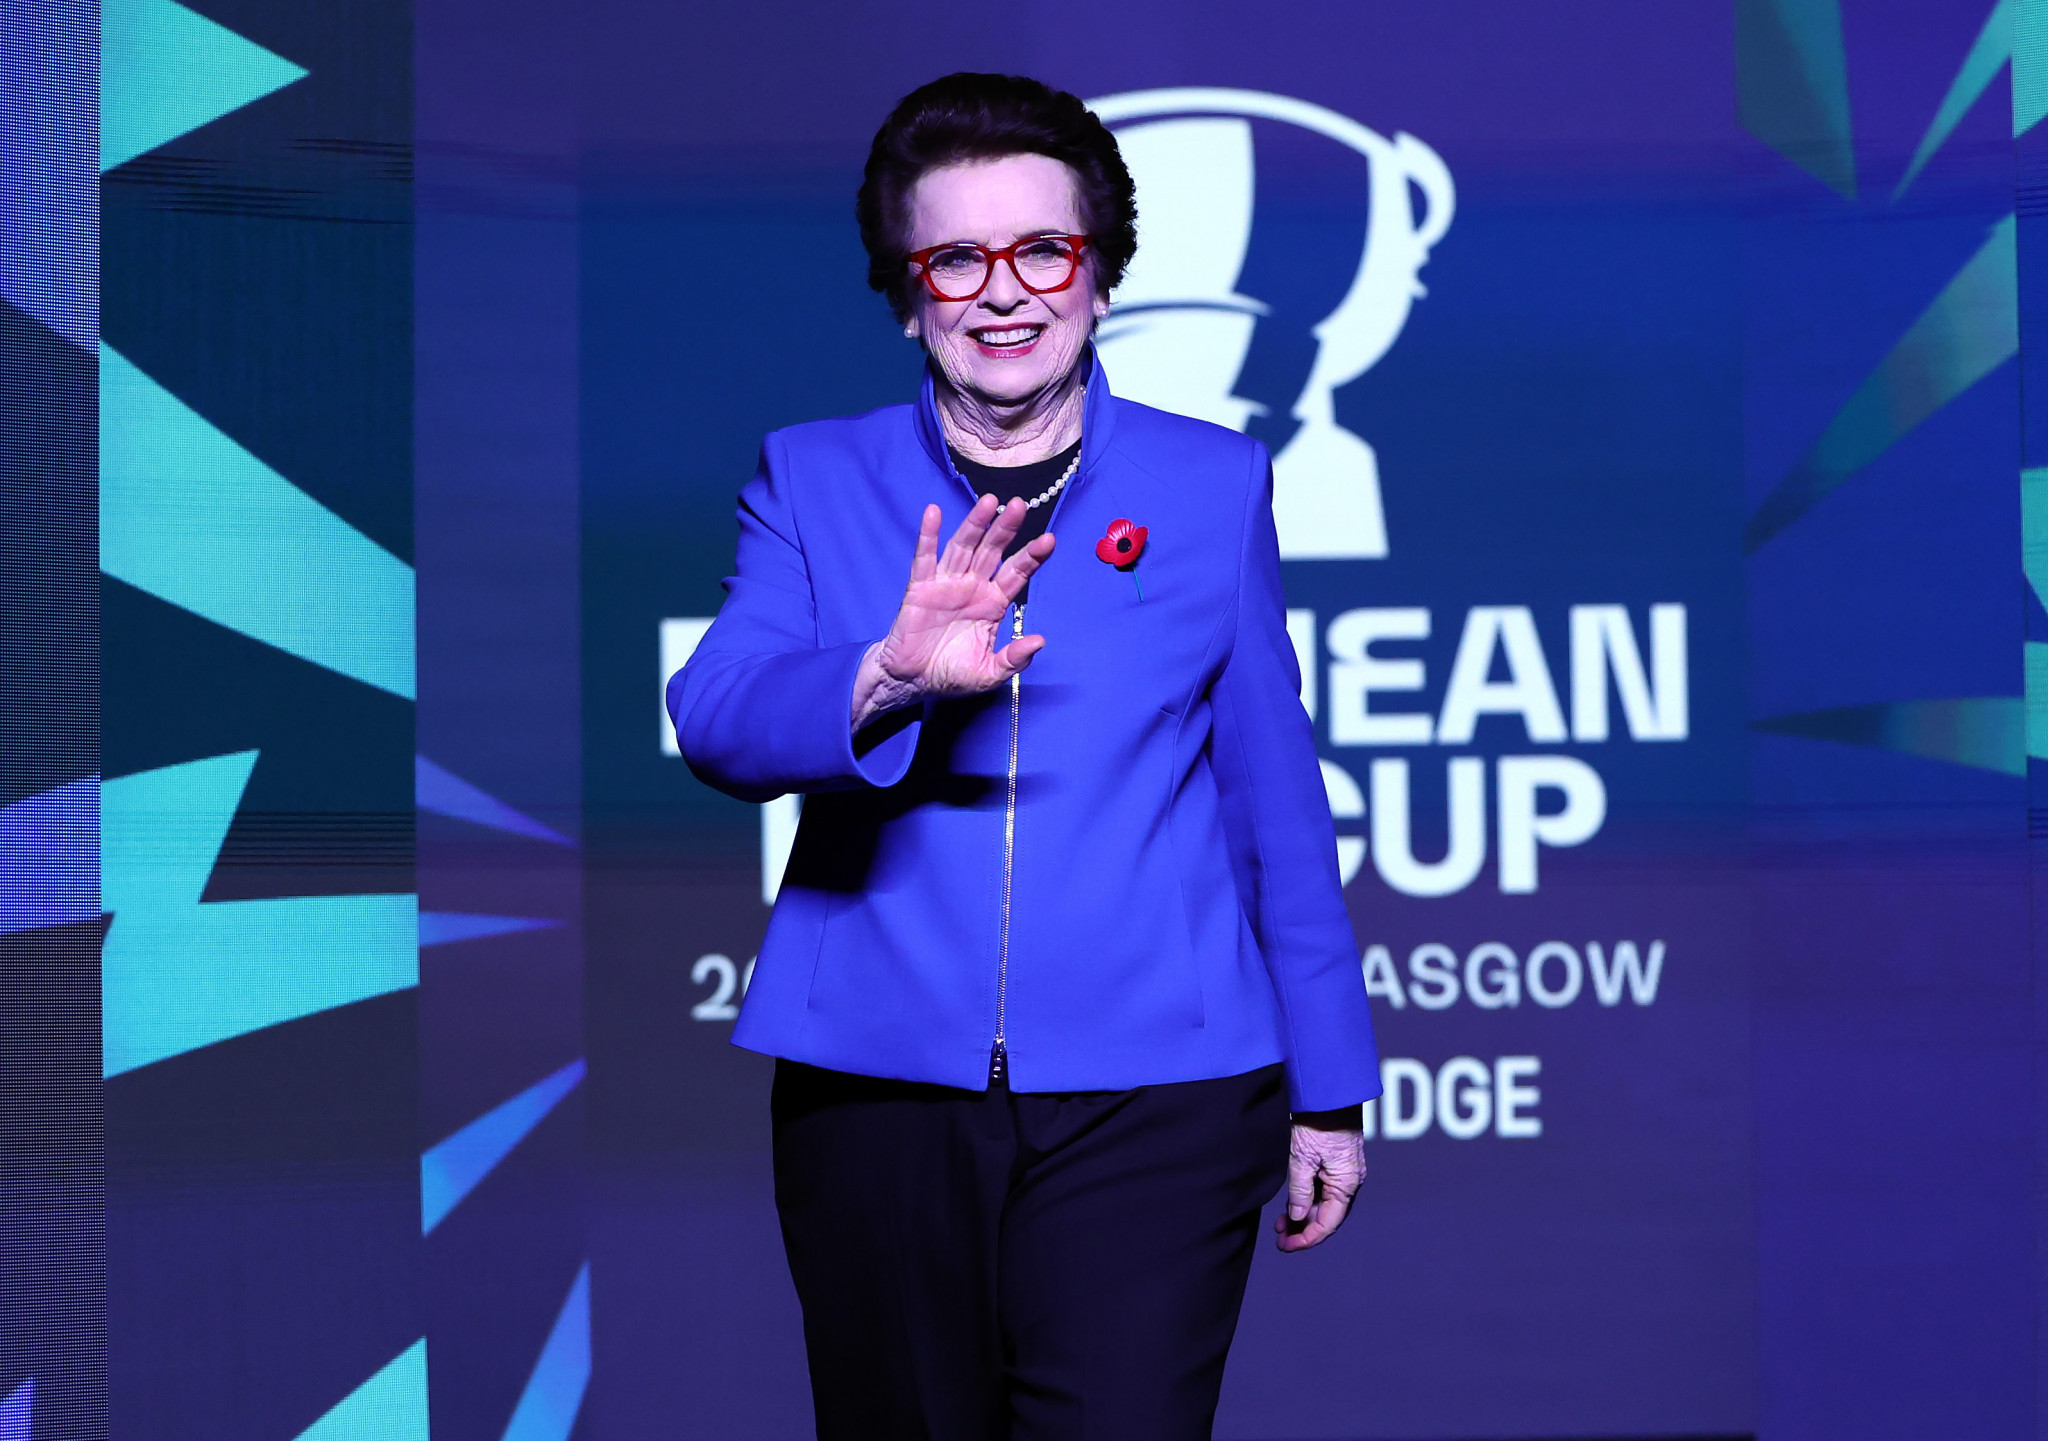 The Fed Cup was renamed the Billie Jean King Cup after the American 12-time Grand Slam champion in 2020 ©Getty Images